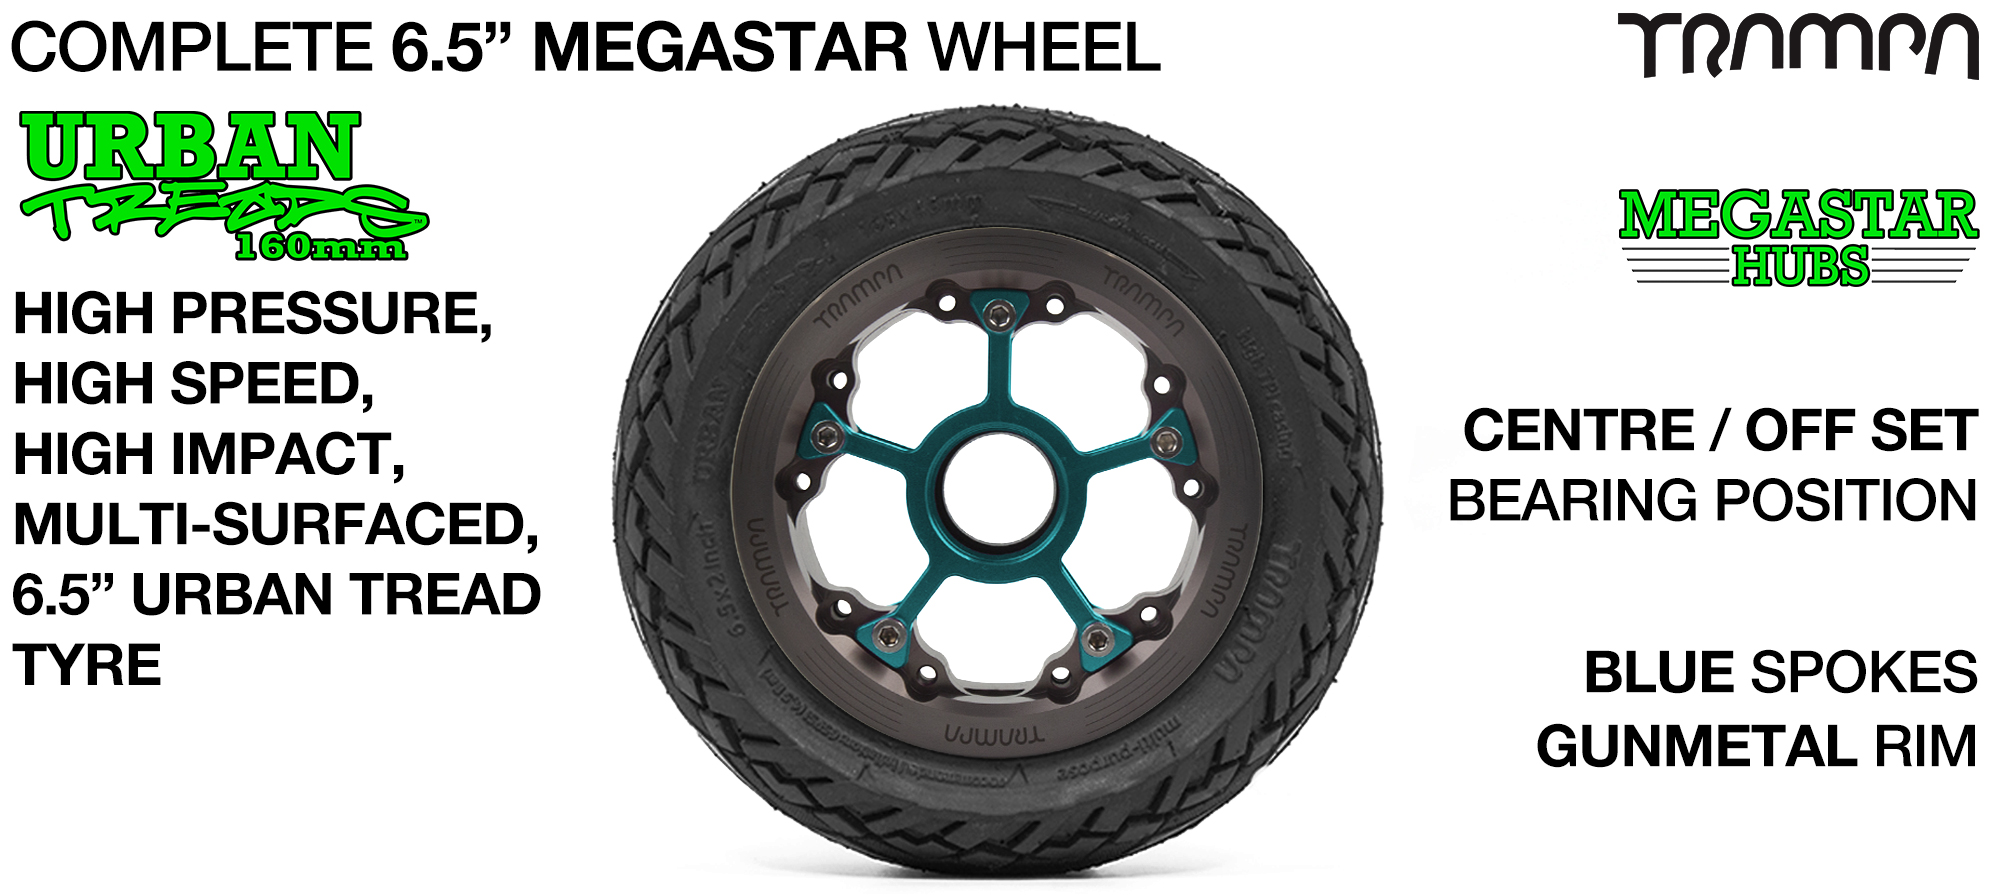 CENTER-SET MEGASTAR 8 Hub with GUNMETAL Rims & BLUE Spokes with the amazing Low Profile 6.5 Inch URBAN Treads Tyres